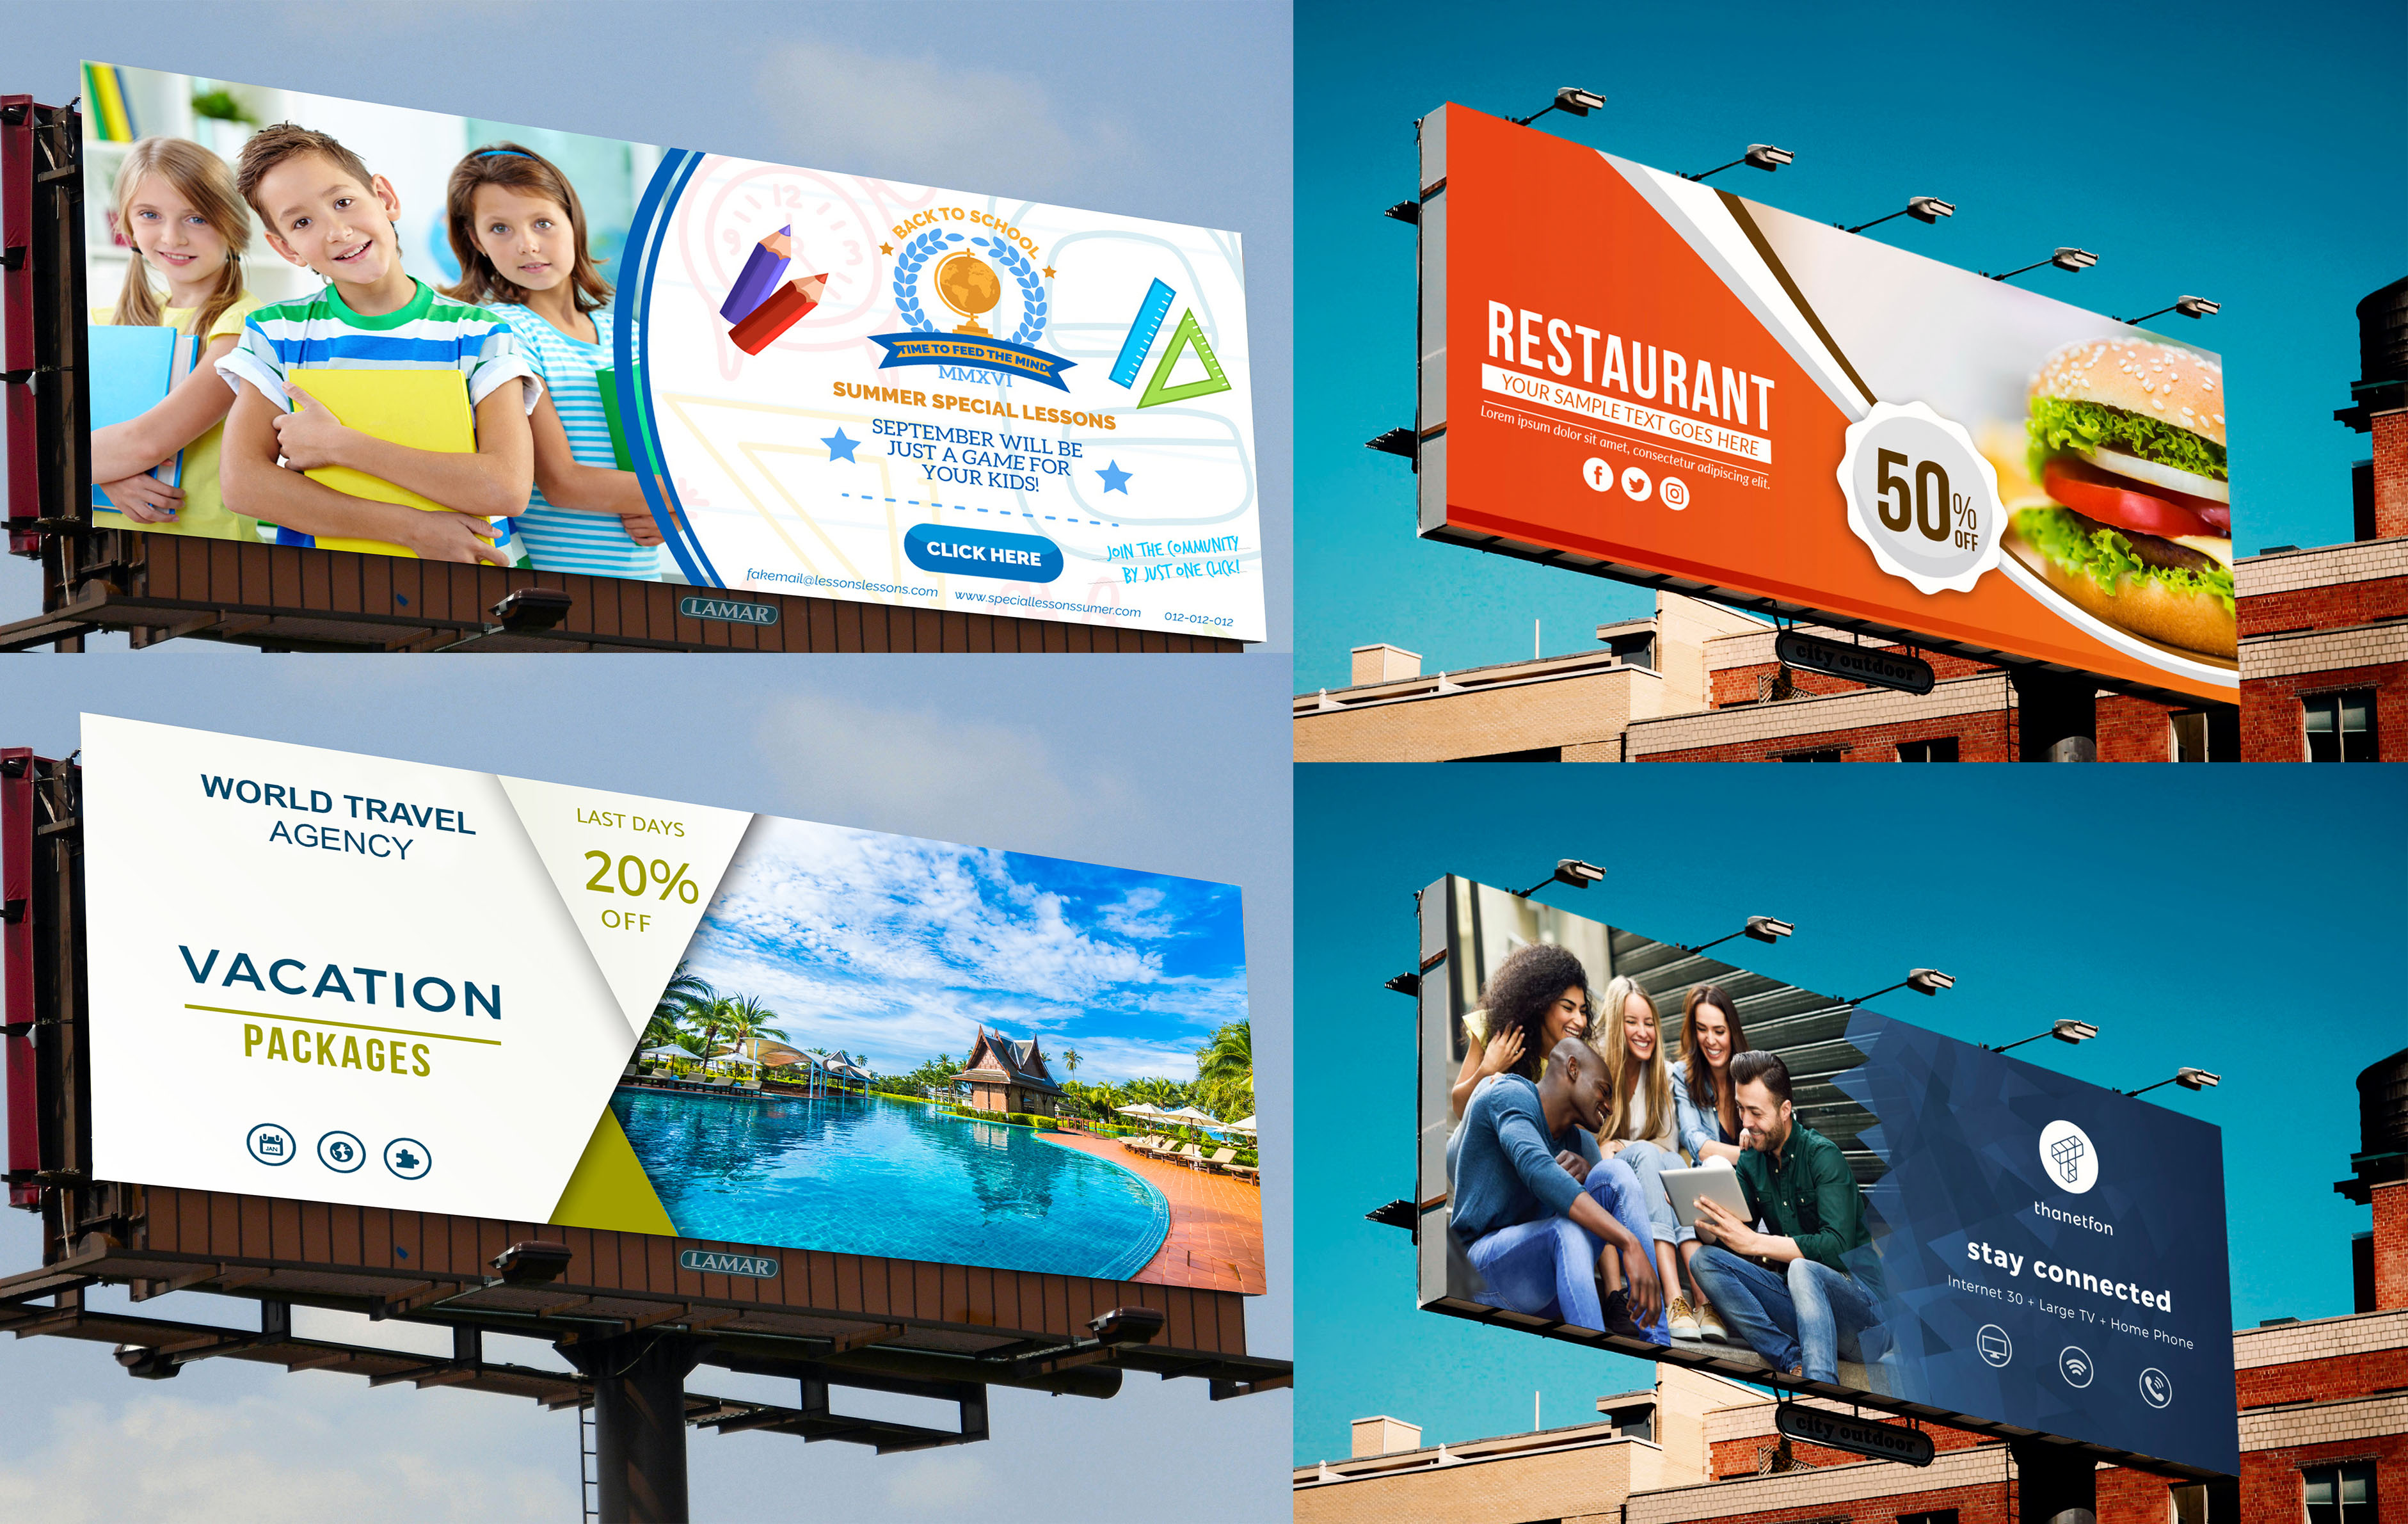 Design Any Banner, Billboard Or Roll-Up within 24 hours